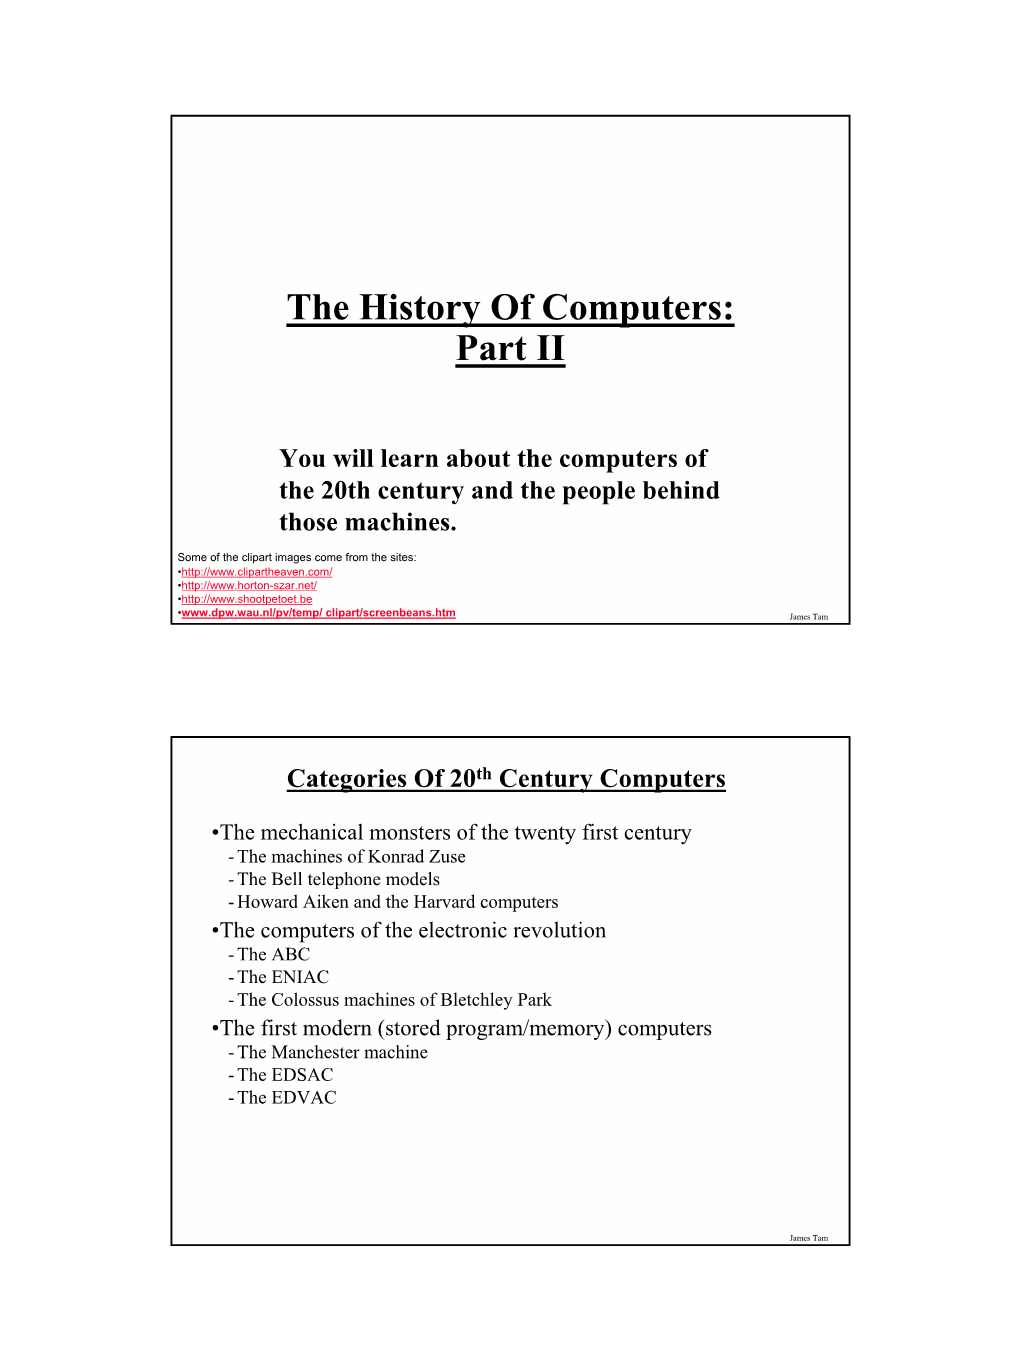 The History of Computers: Part II